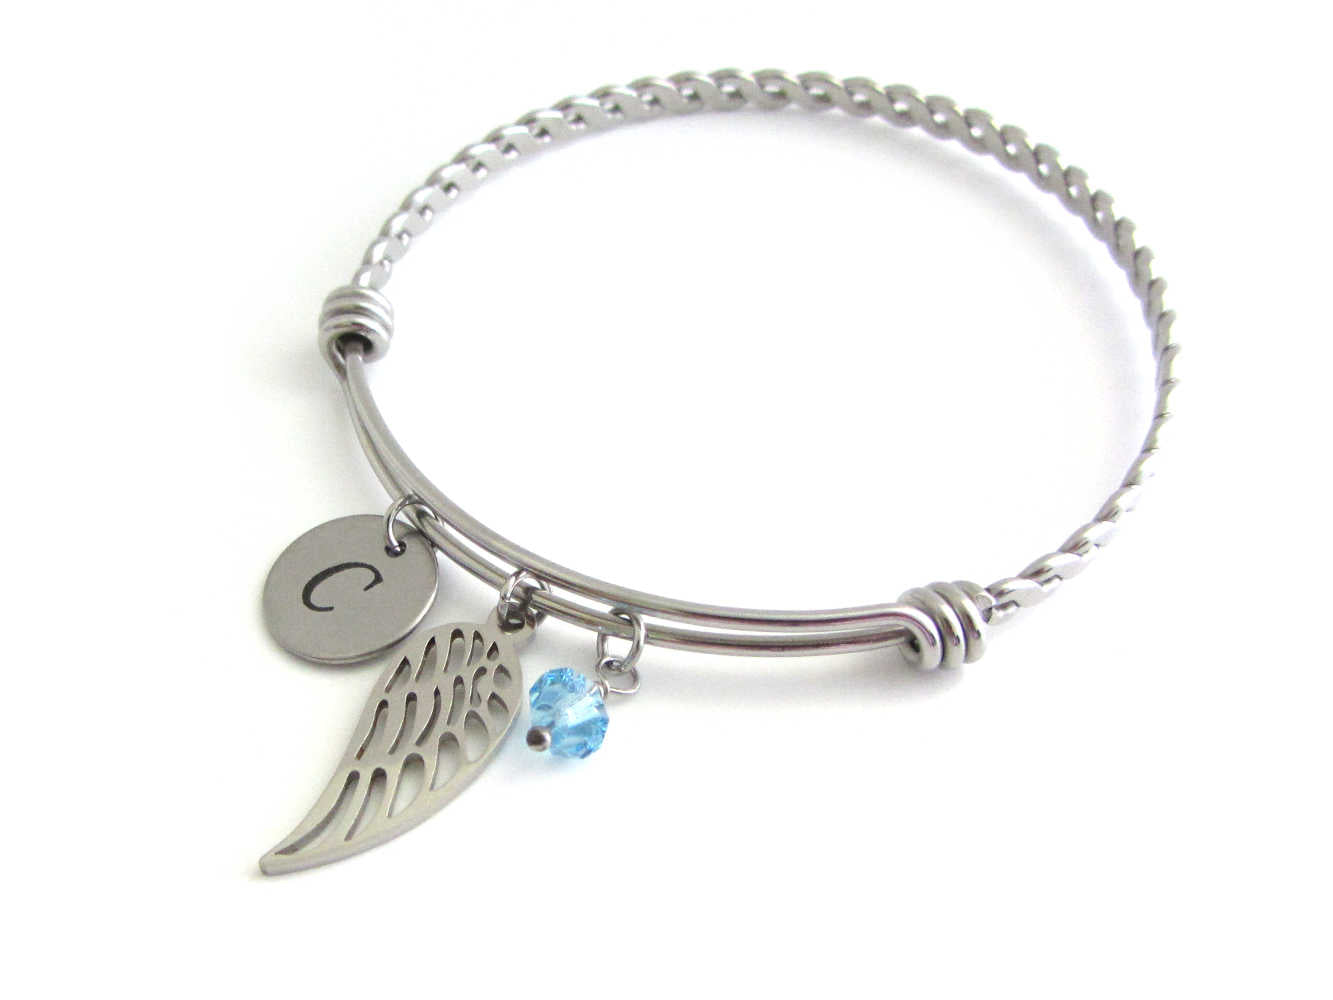 stainless steel laser engraved capital initial letter disc charm, single angel wing charm and a light blue crystal charm on a bangle with braided twist pattern